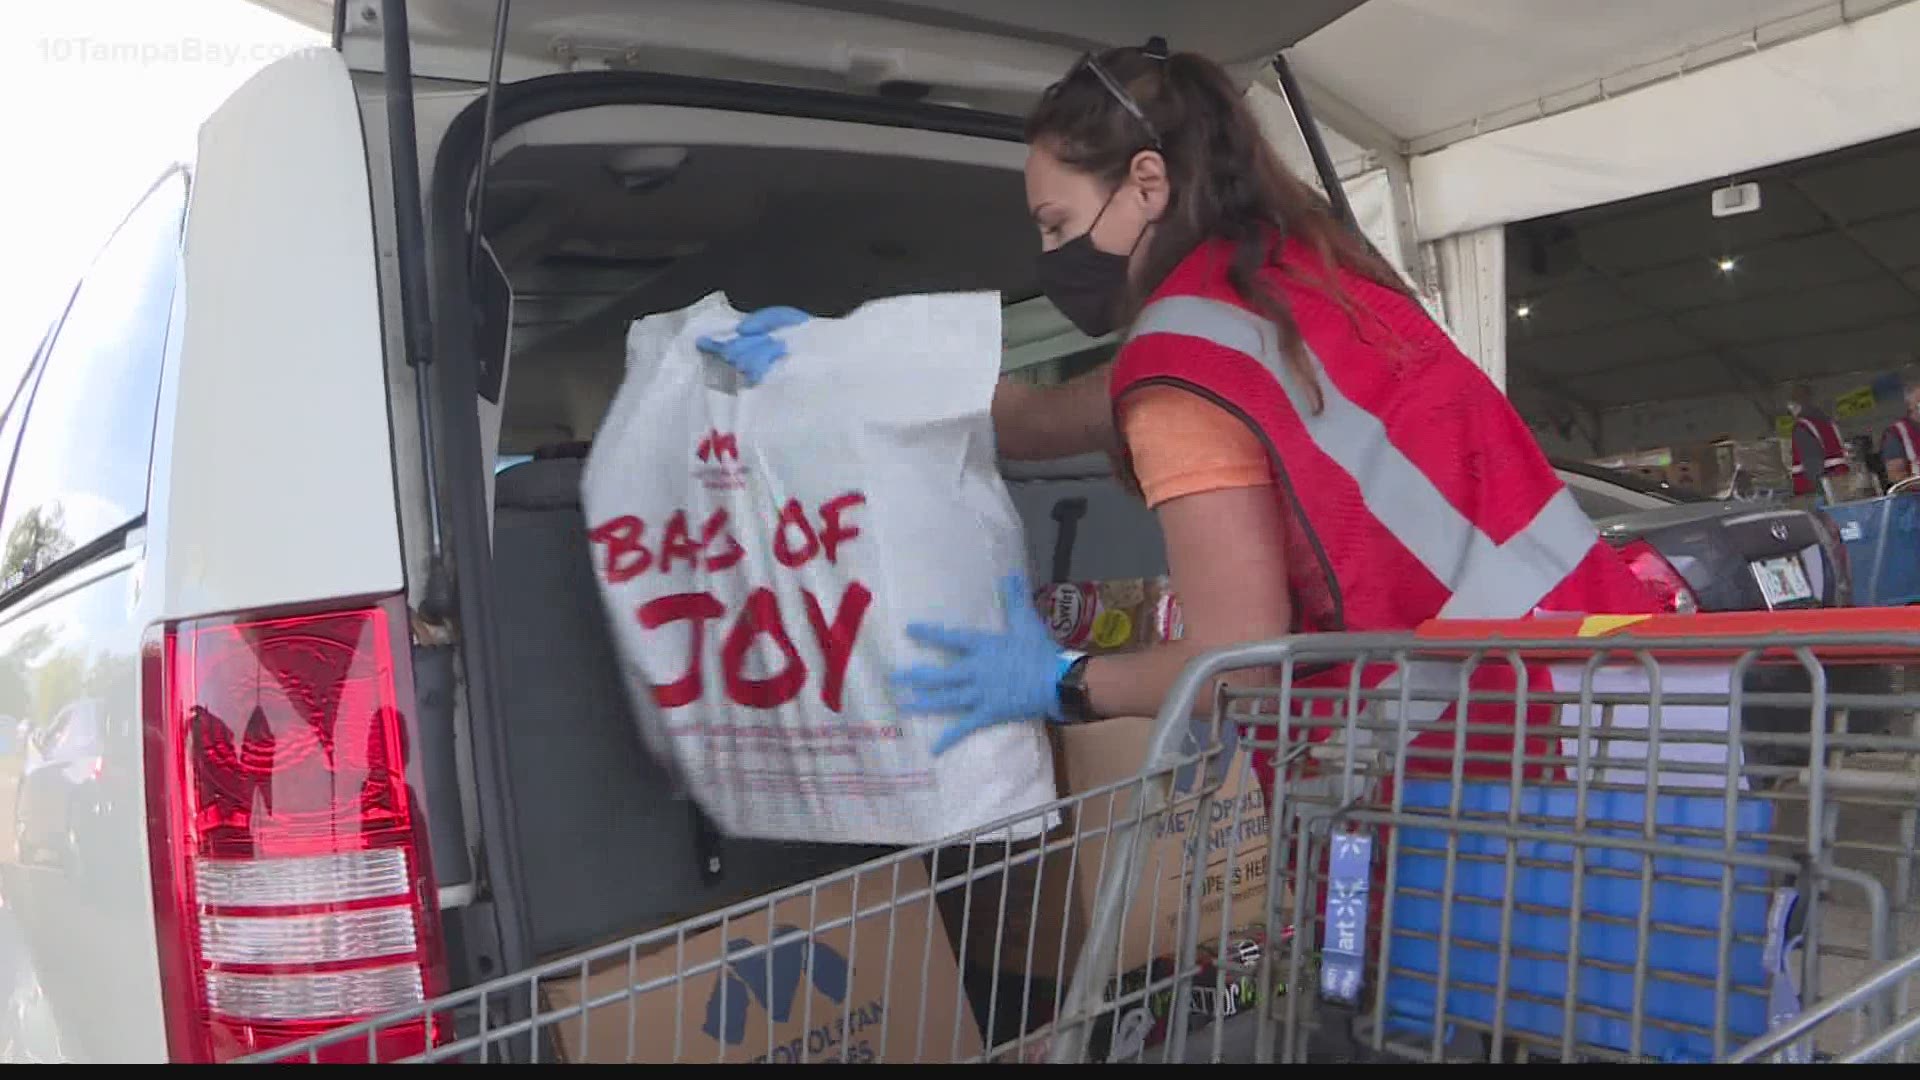 Metropolitan Ministries is still accepting donations of toys, holiday foods, and gift cards.